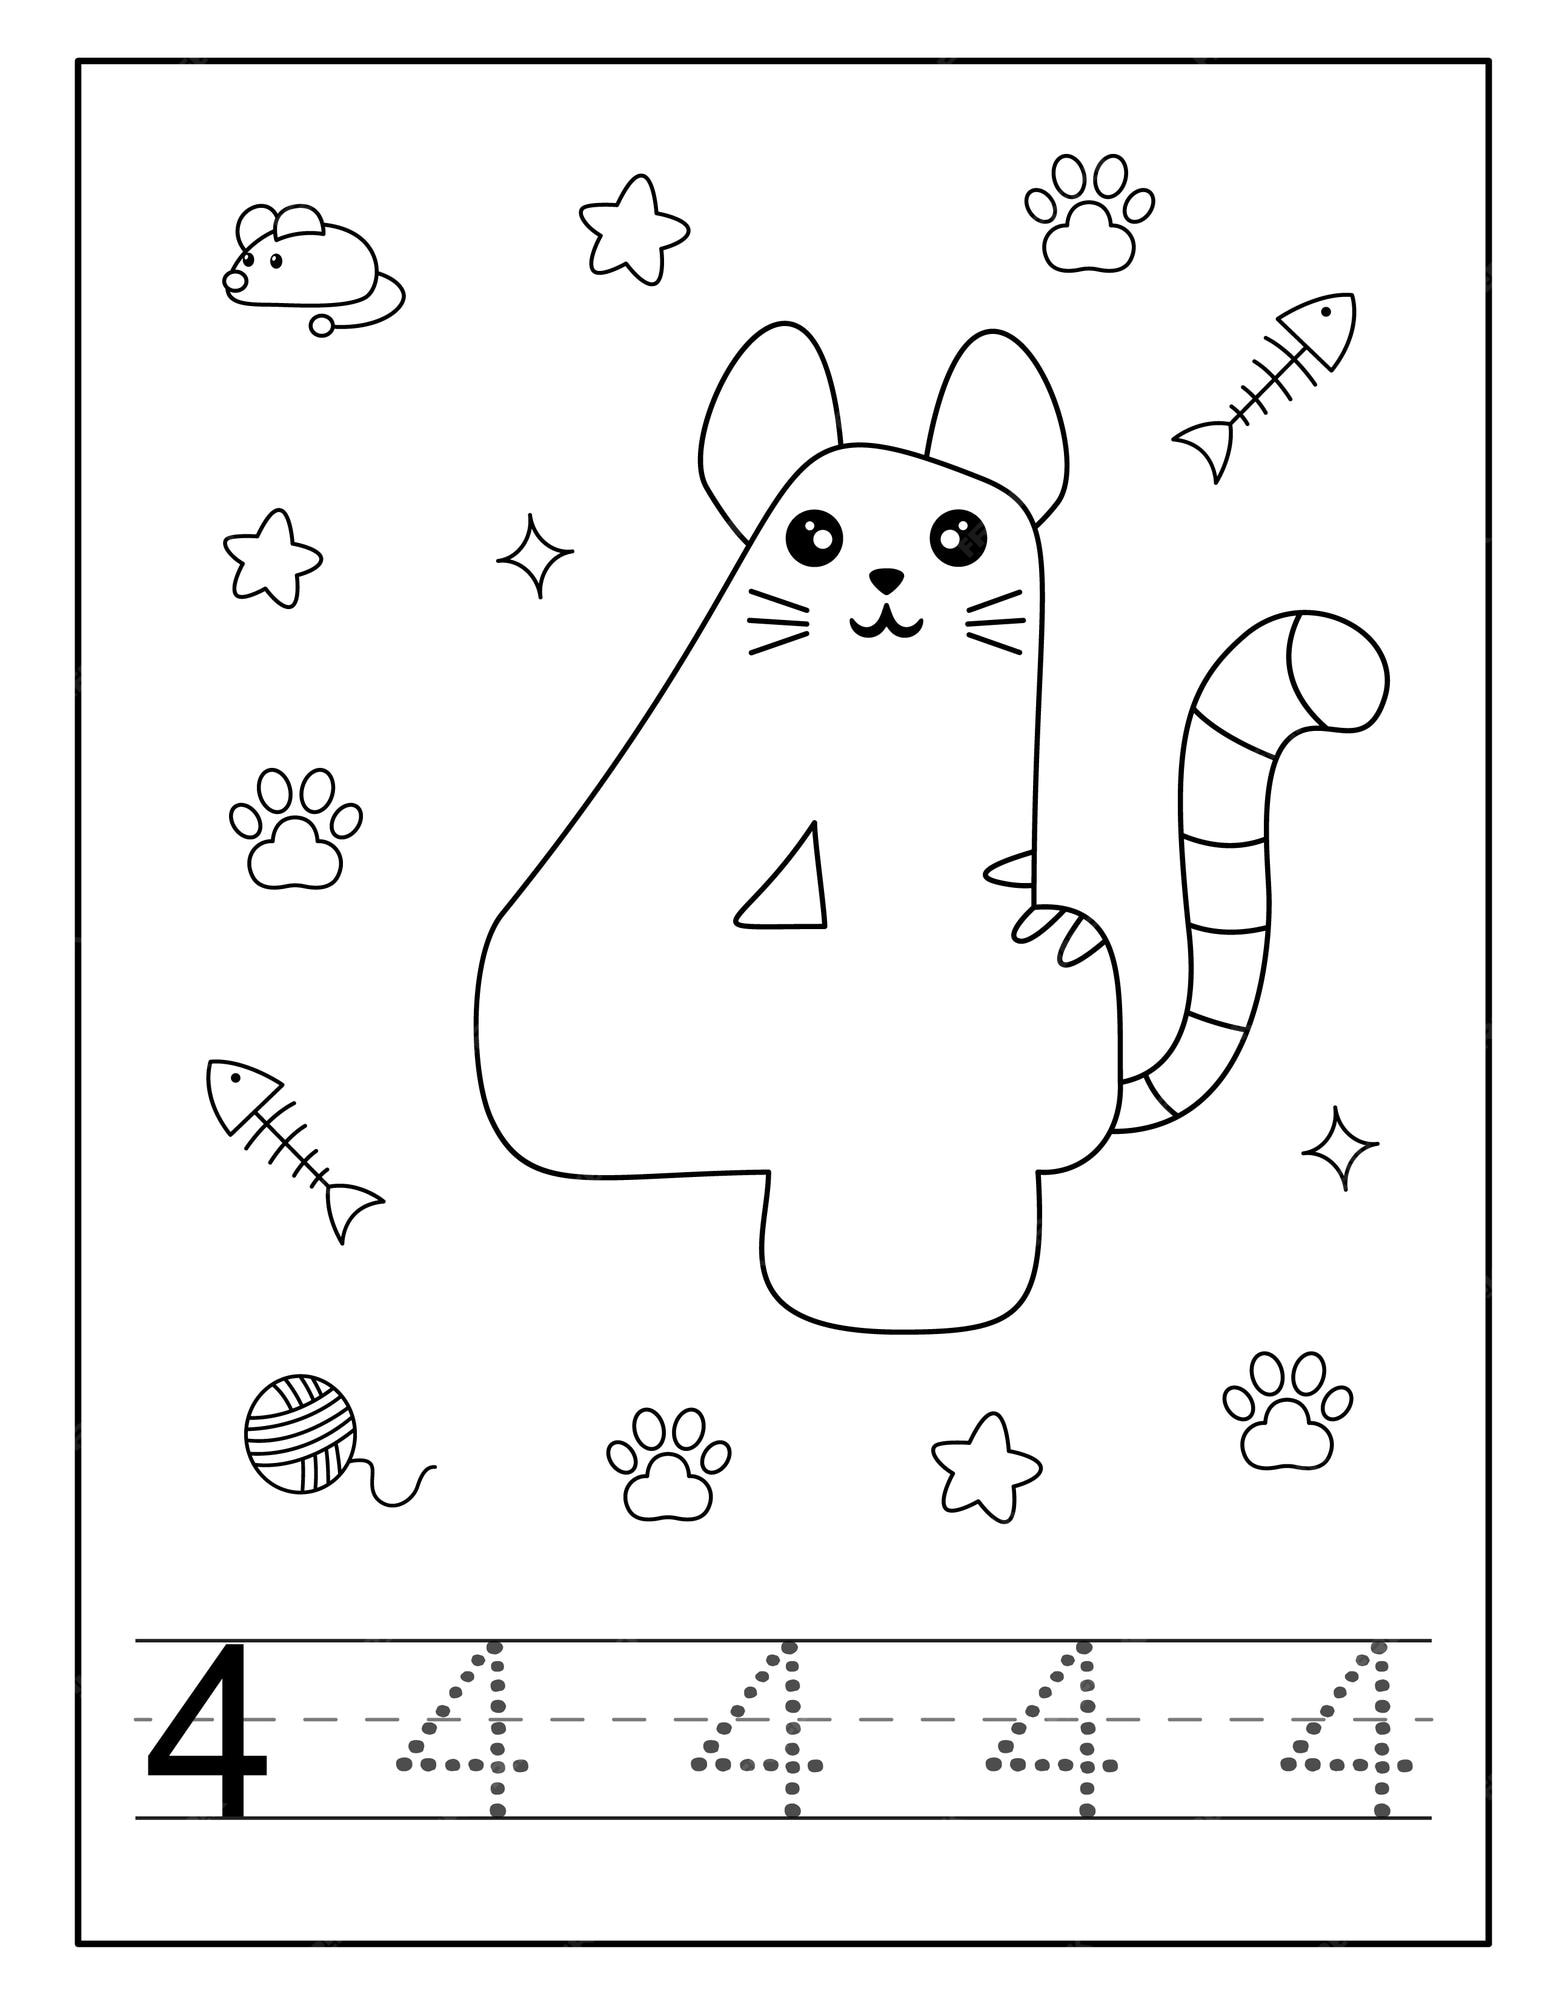 Premium vector cat style number coloring page for toddlers